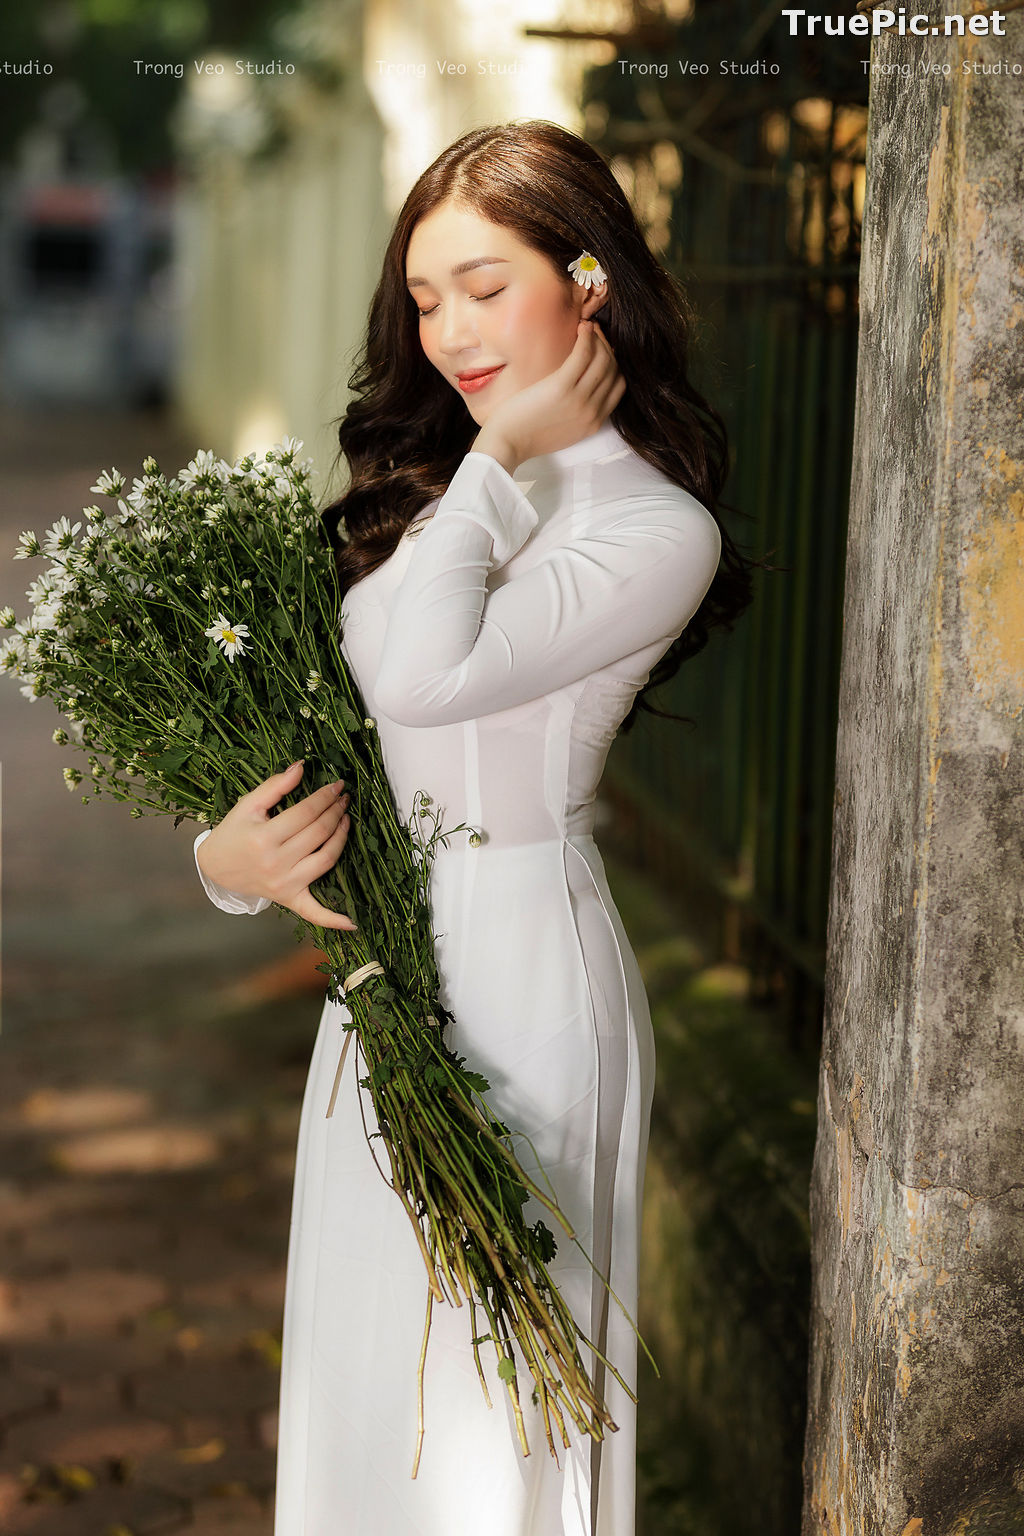 Image The Beauty of Vietnamese Girls with Traditional Dress (Ao Dai) #1 - TruePic.net - Picture-30